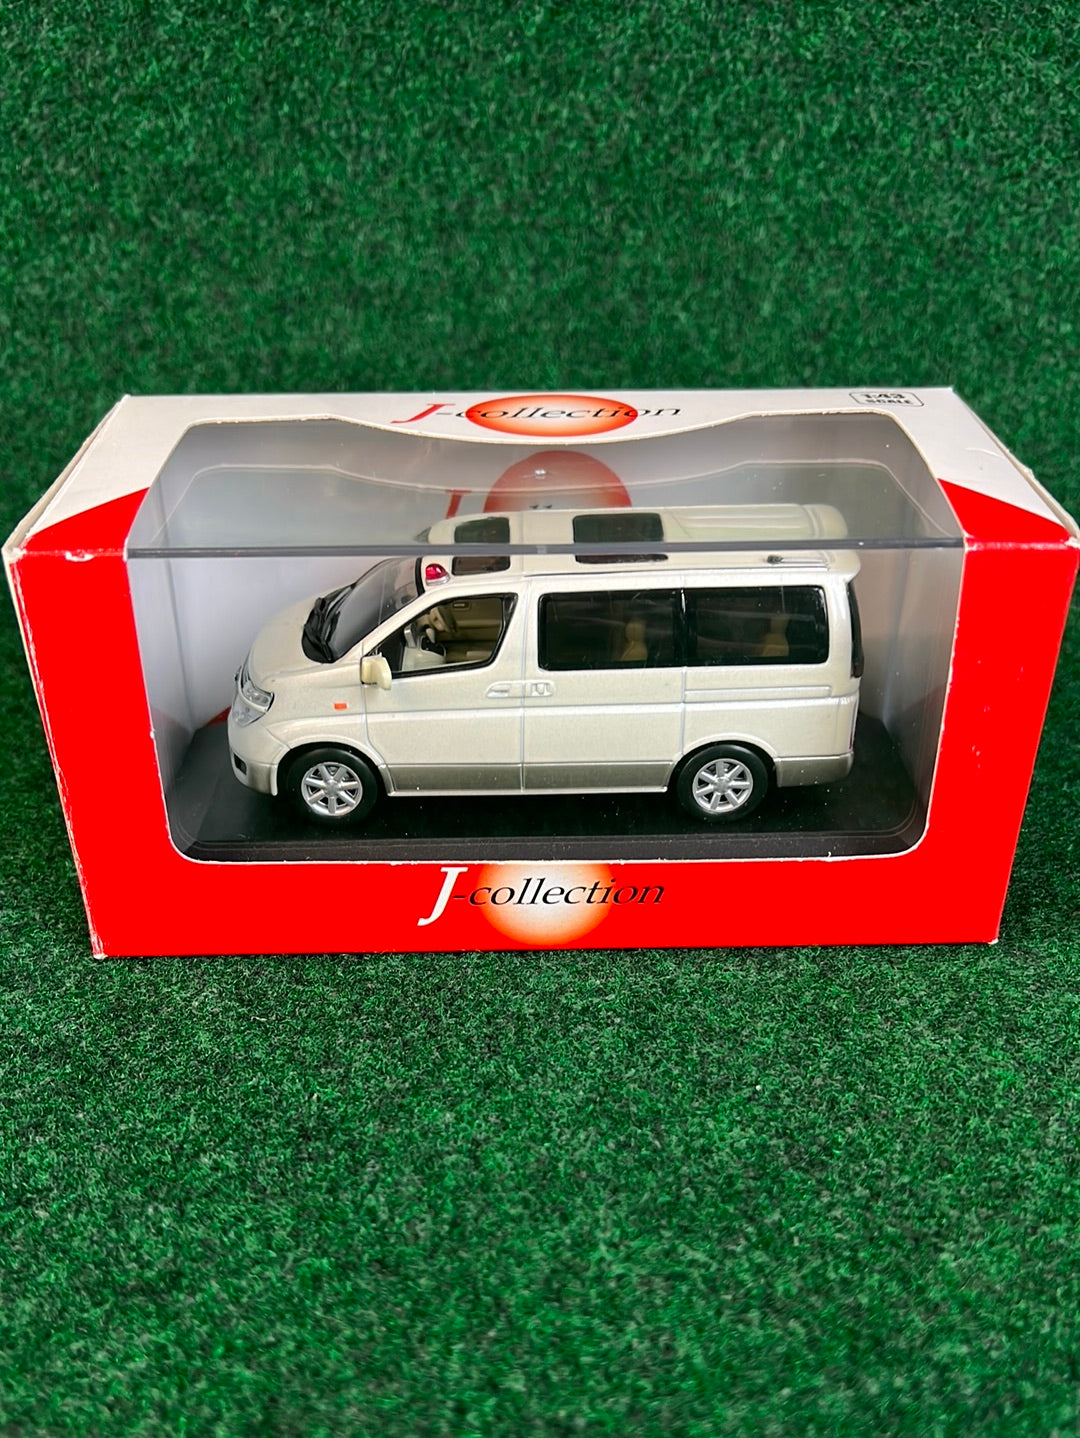 J-Collection (KYOSHO) Nissan Elgrand 2-Tones Van Modified 1/43 Scale Diecast